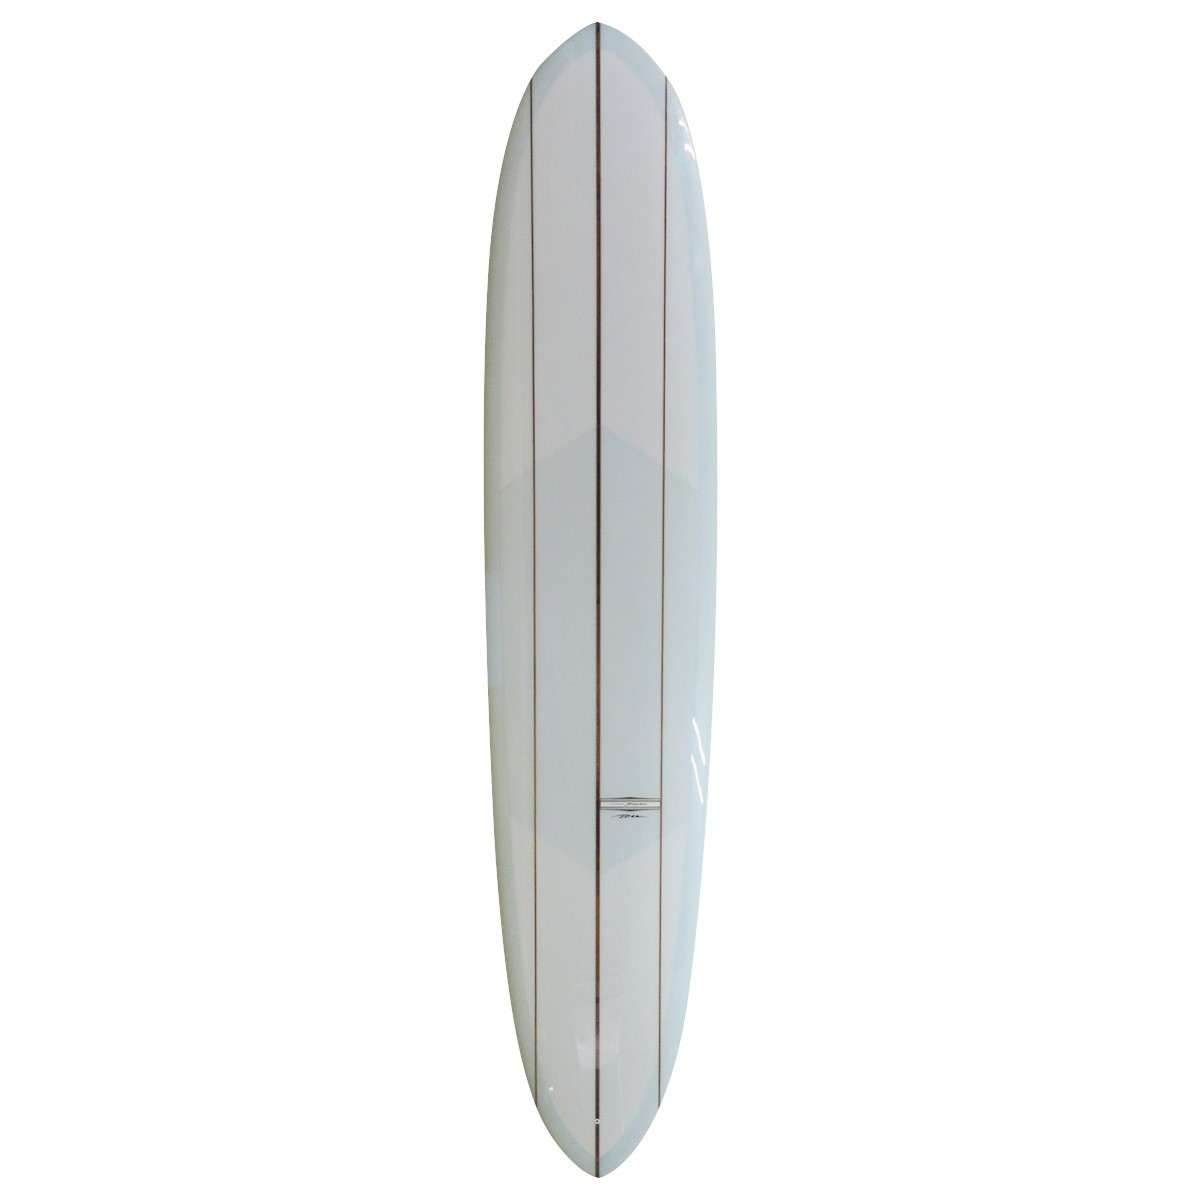 YU SURF CLASSIC / ROUND PIN NOSERIDER 9`5 Shaped by RU